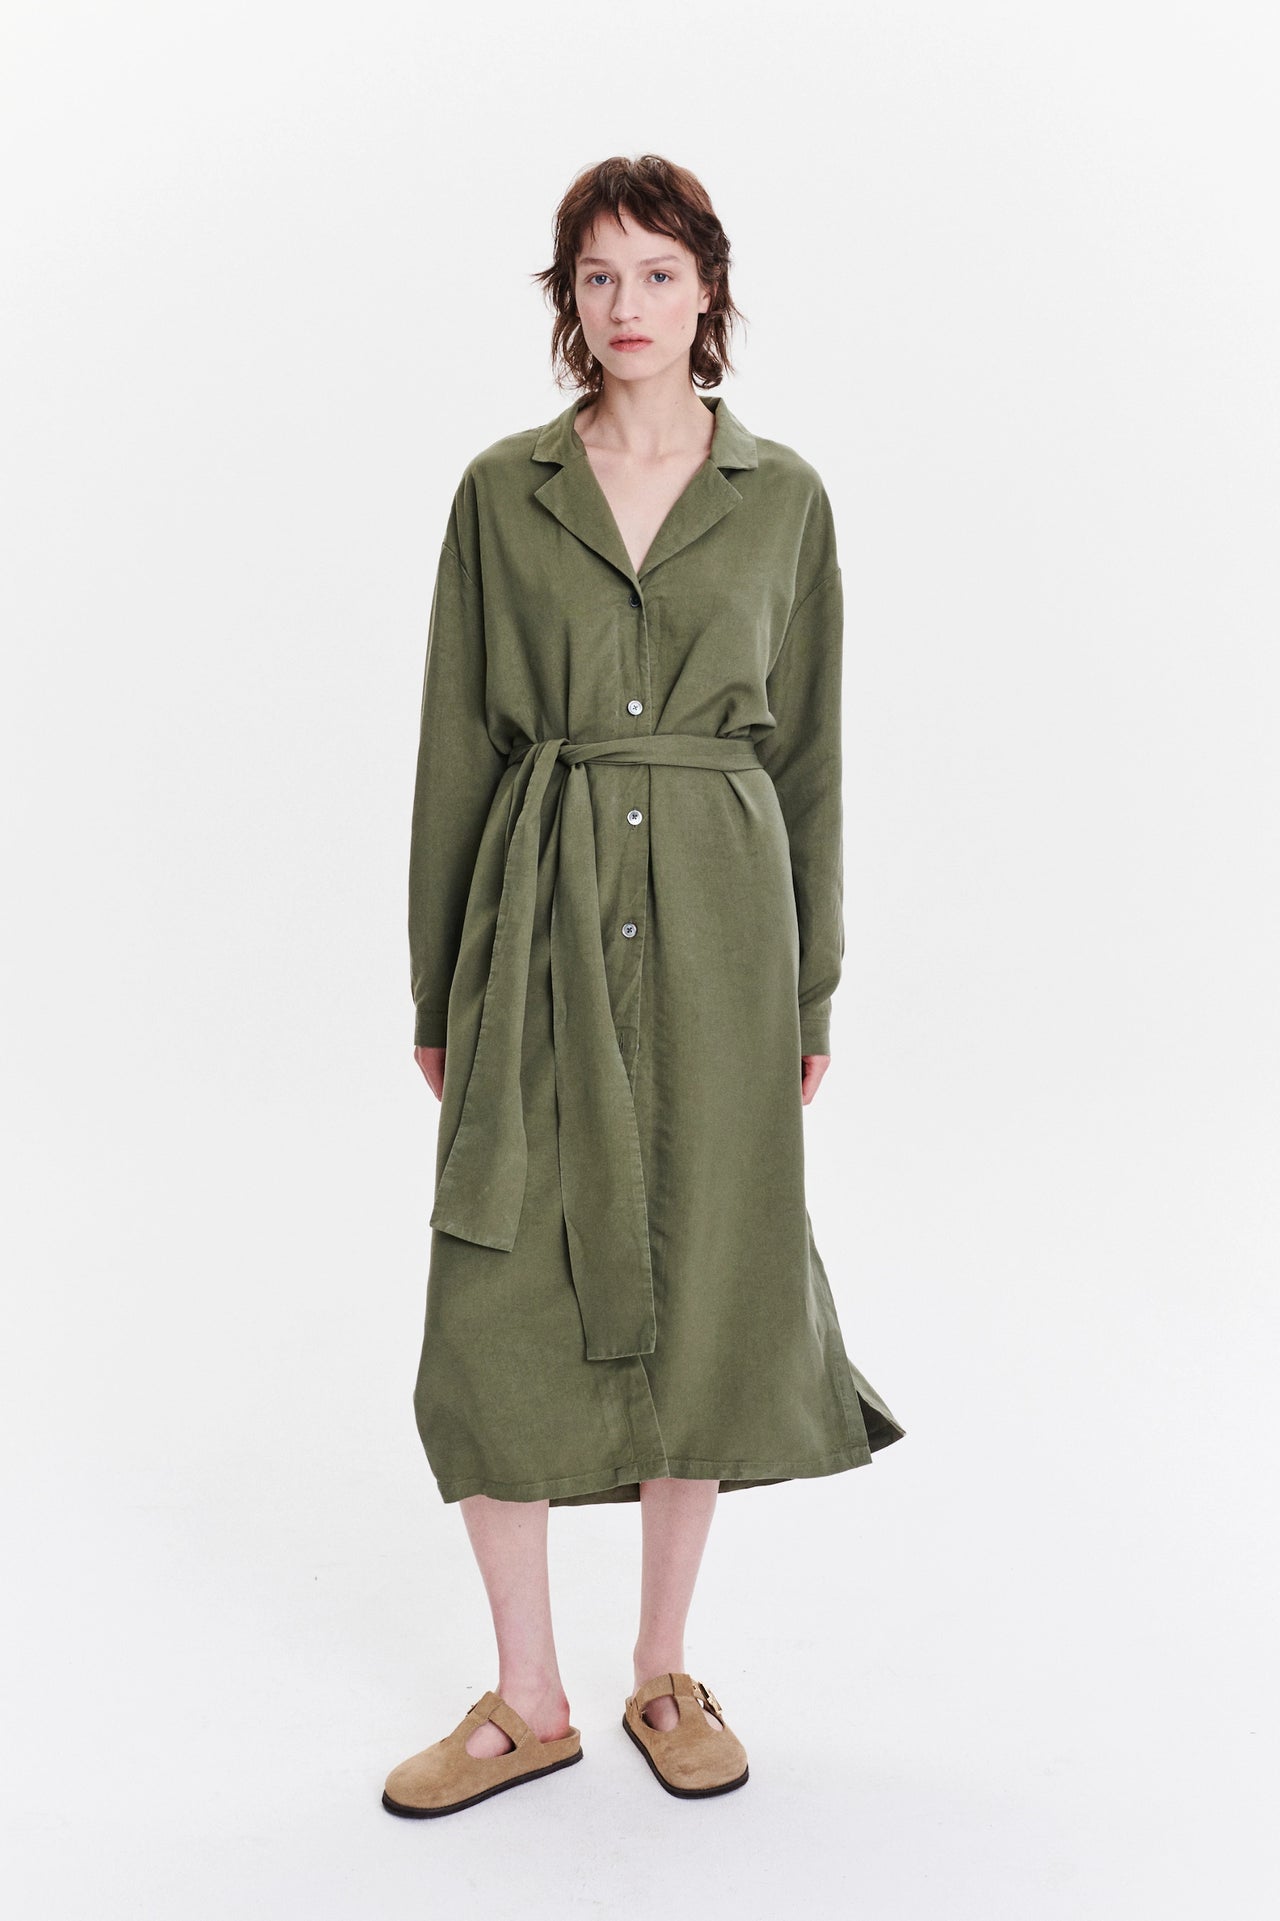 Maxi Dress in an Olive Green Sustainable Smooth and Soft High End Italian Lyocell Gabardine